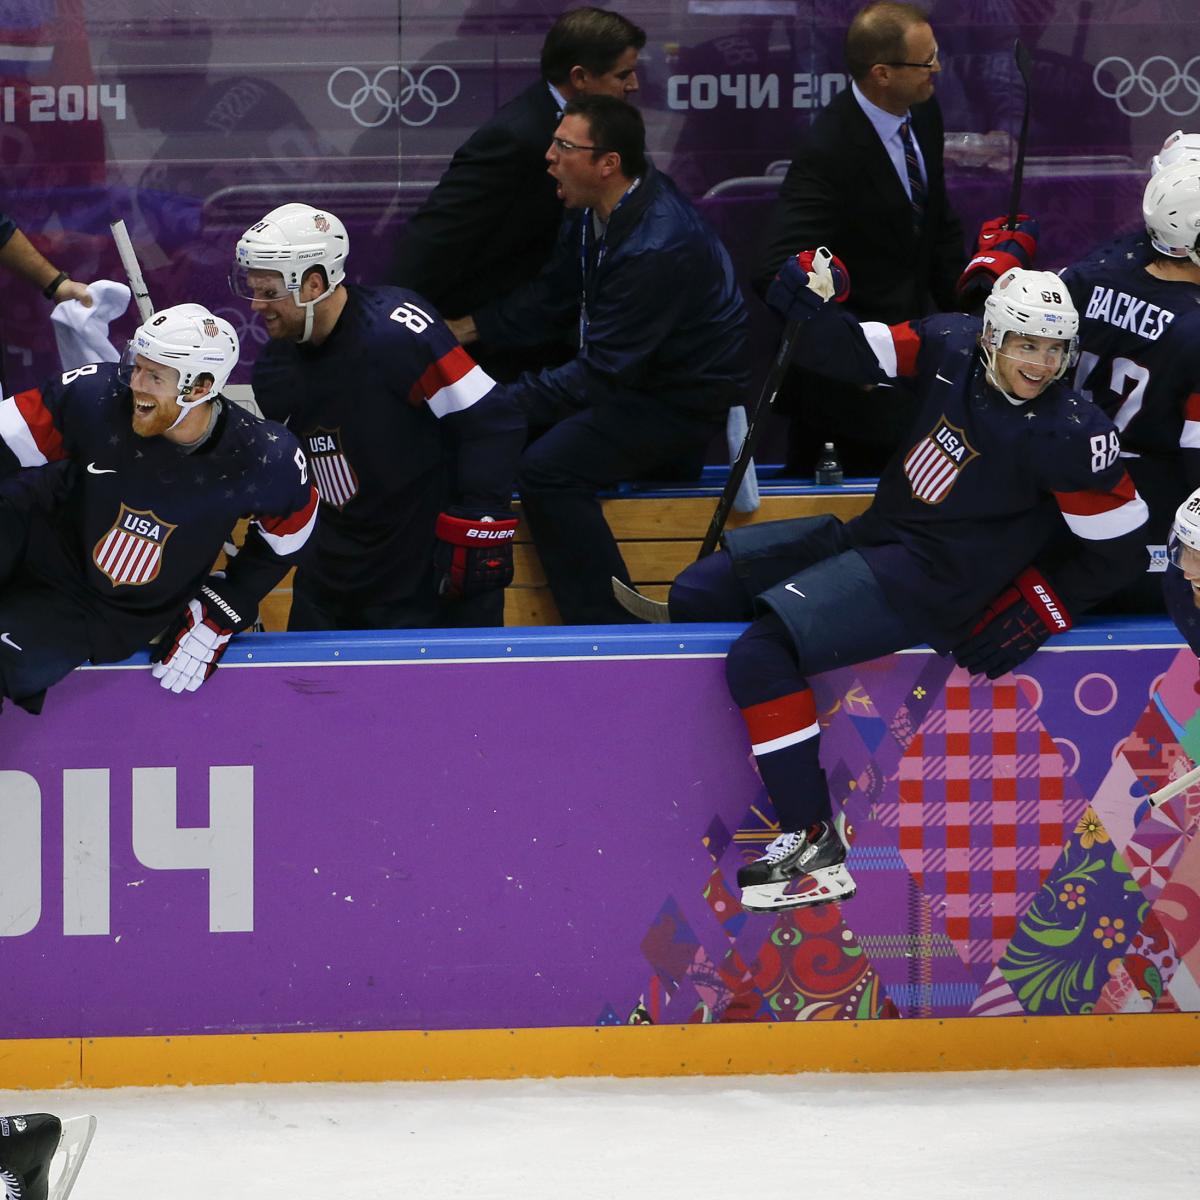 Projecting the 2022 United States men's Olympic hockey roster